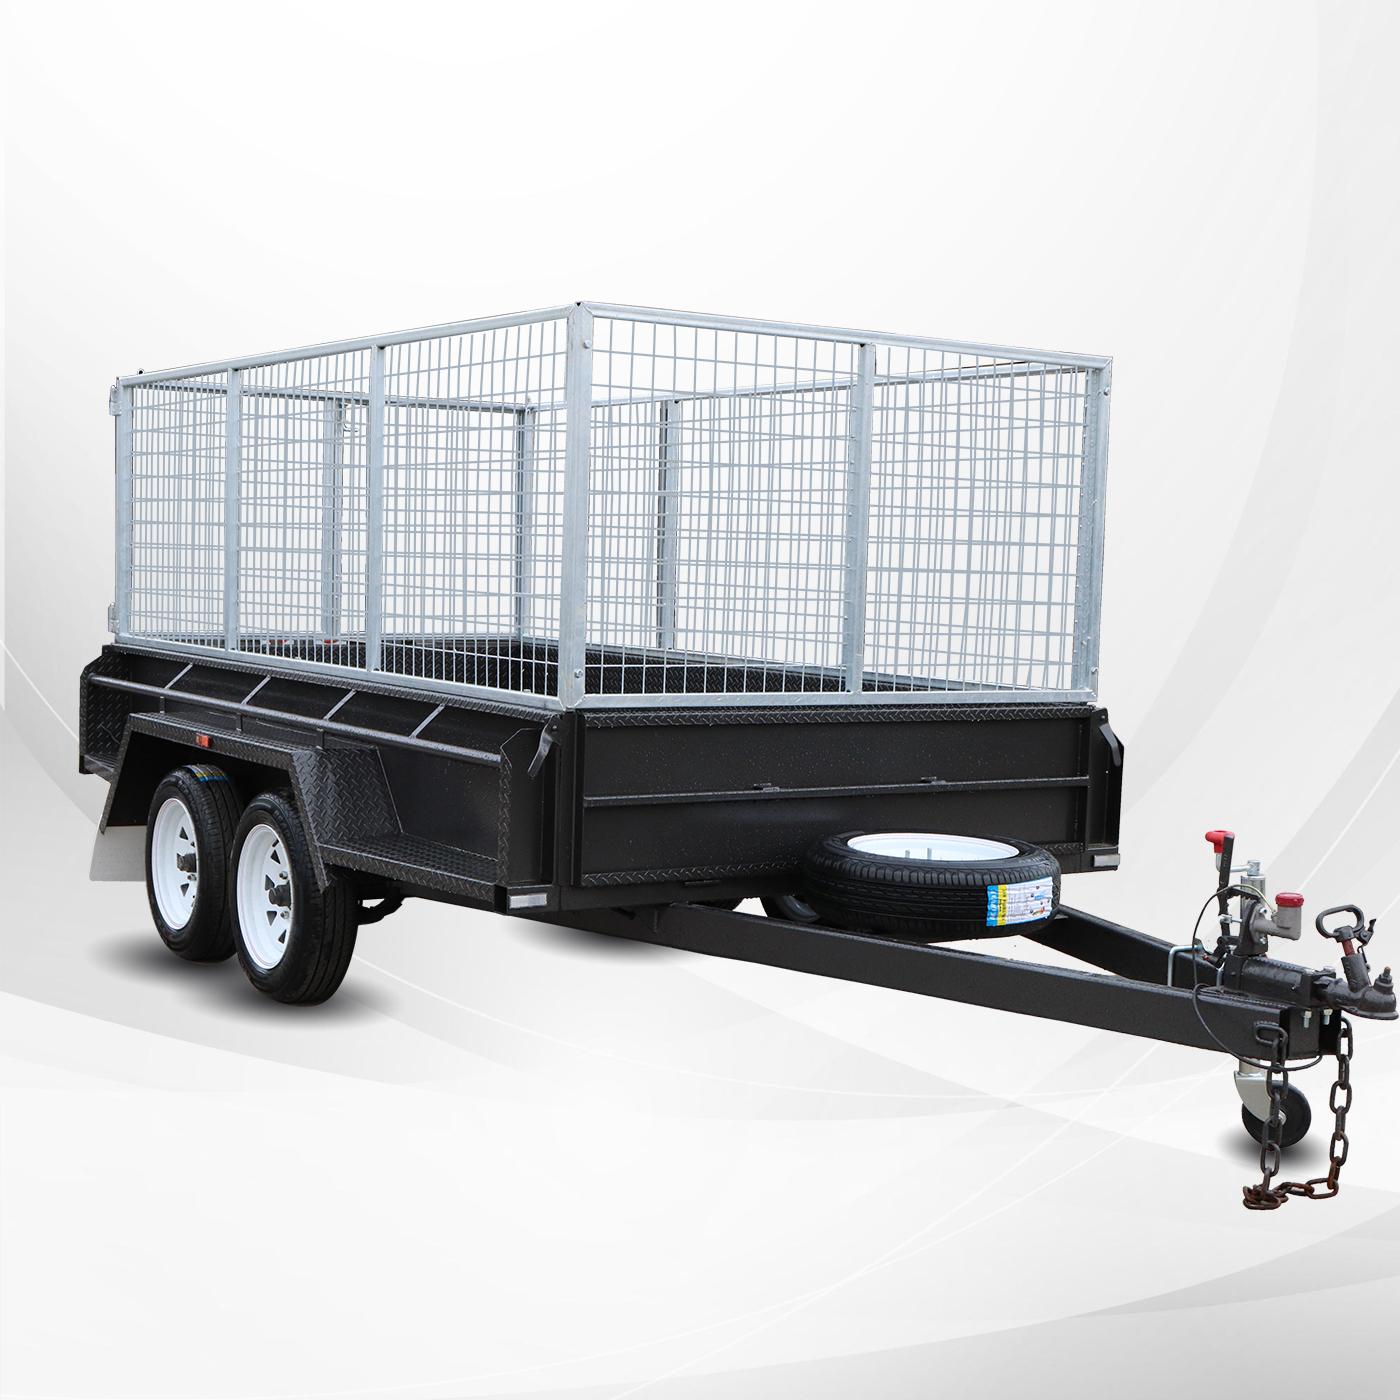 10x5 Heavy Duty Cage Trailer for Sale Melbourne